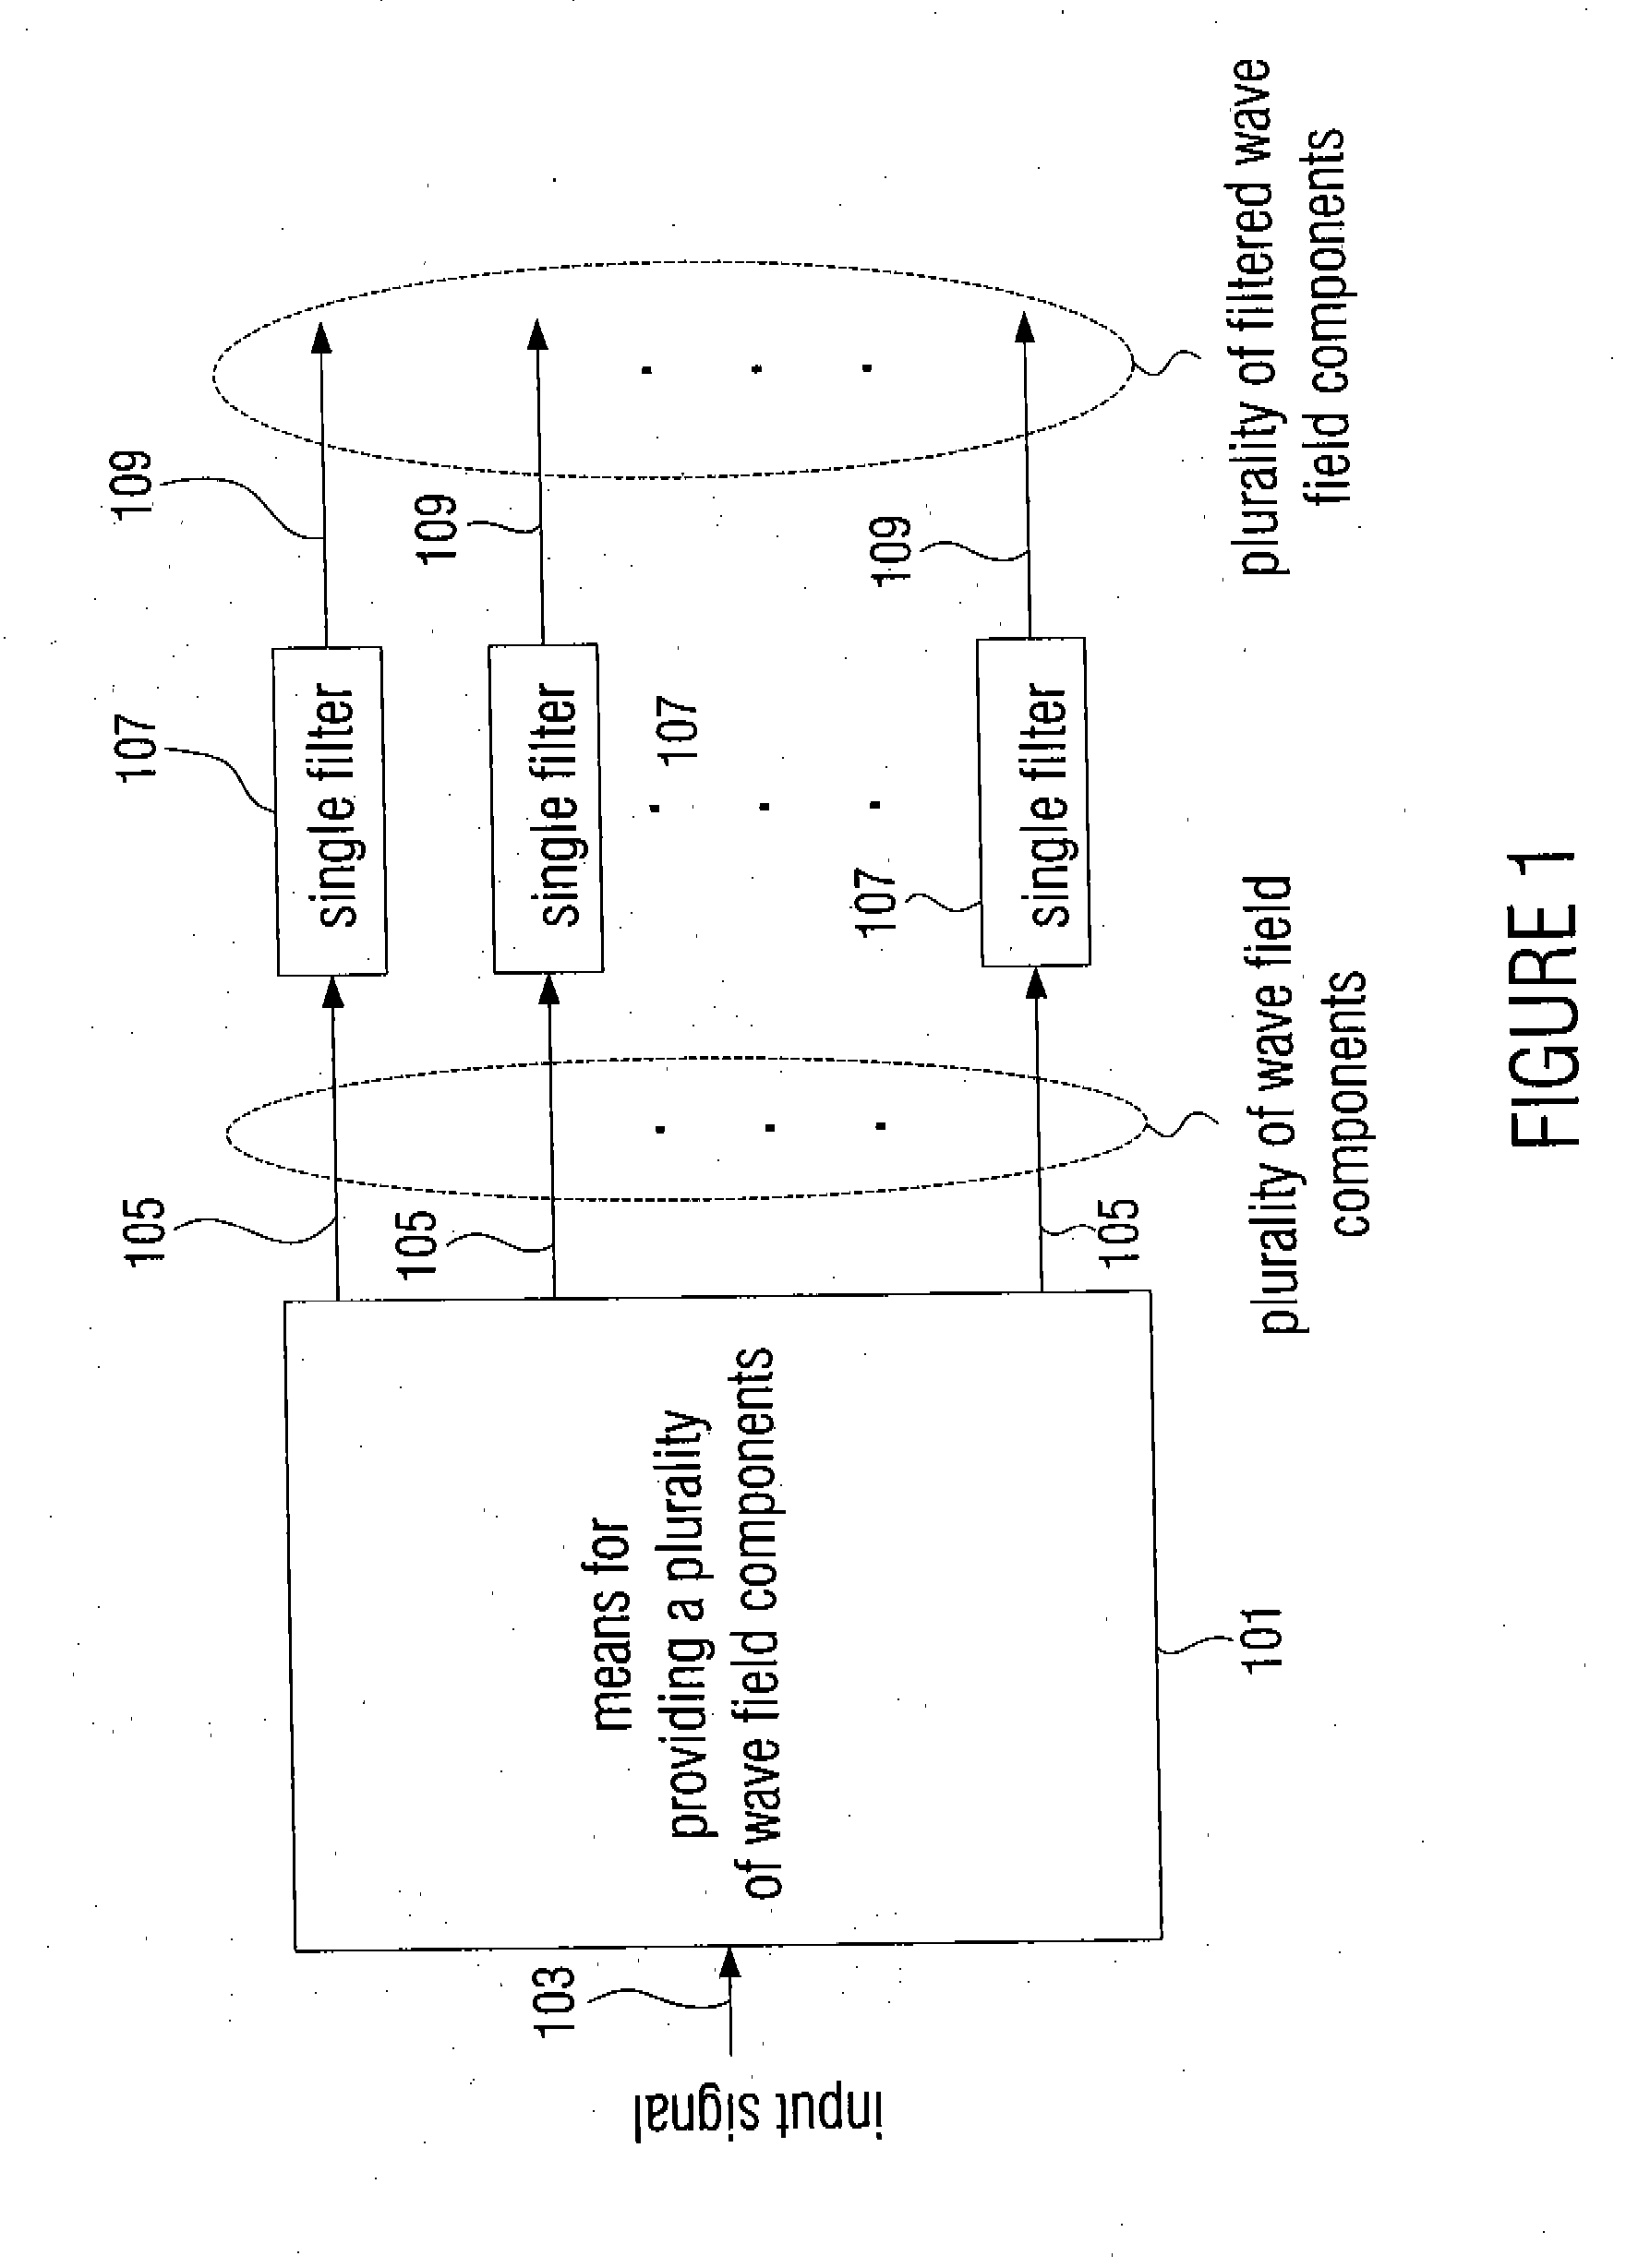 Apparatus and Method for Processing an Input Signal